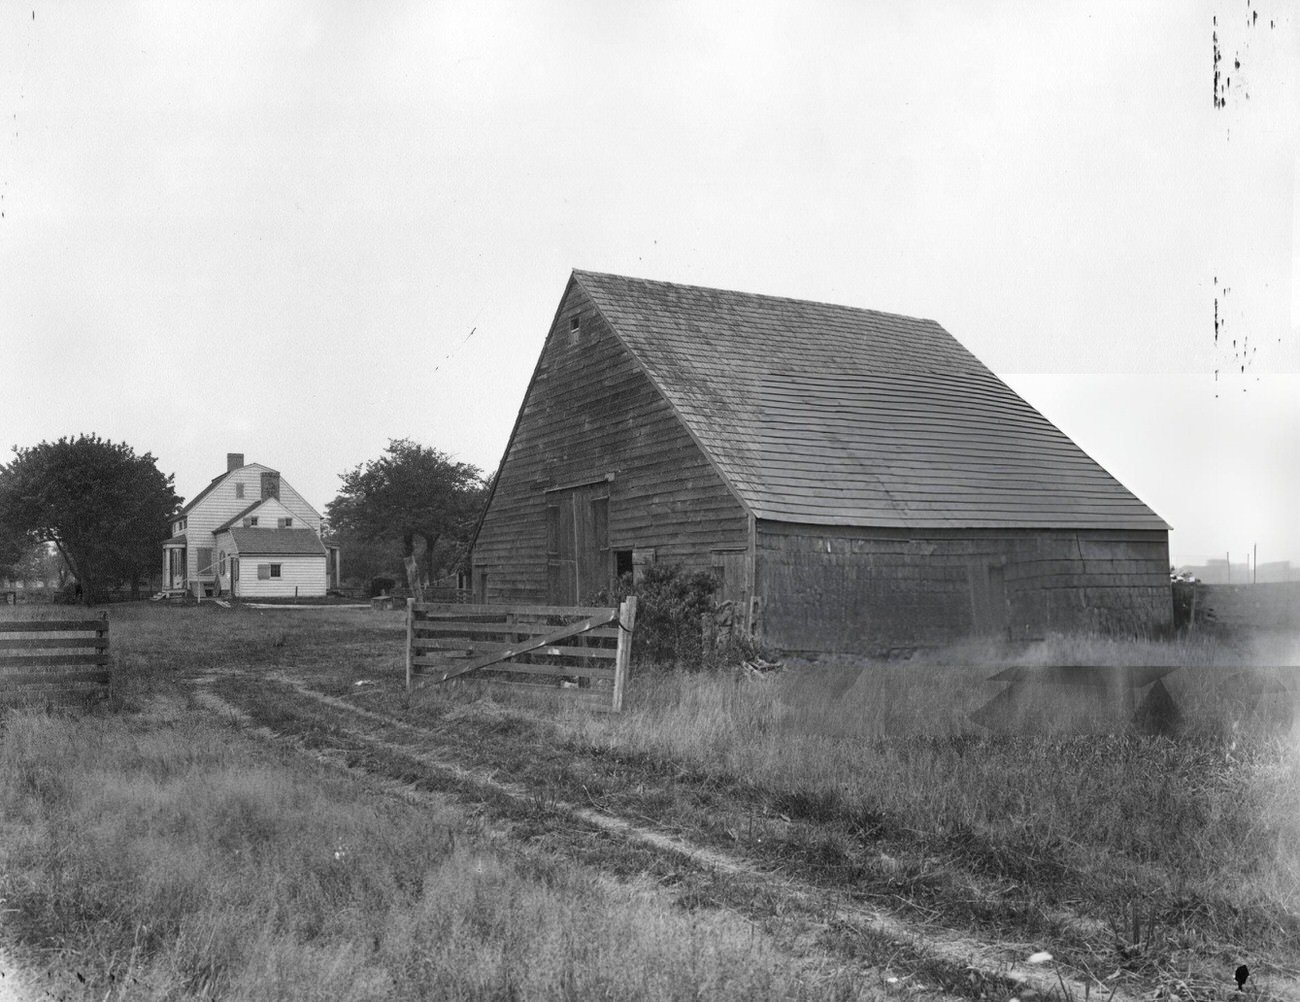 18Th Century Barn And Early 19Th Century House In The Bronx, 1895.